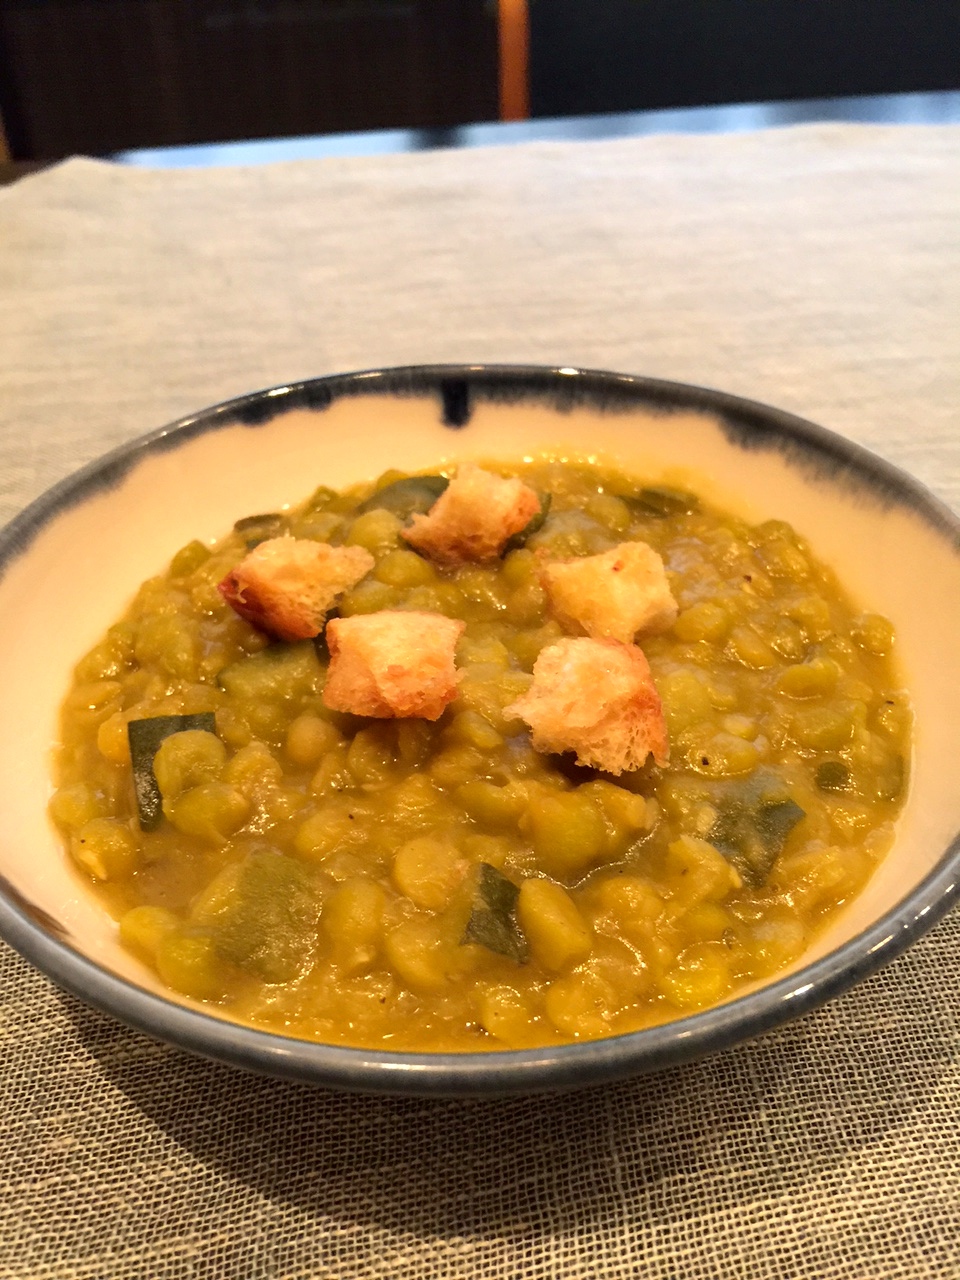 3rd plated split pea soup